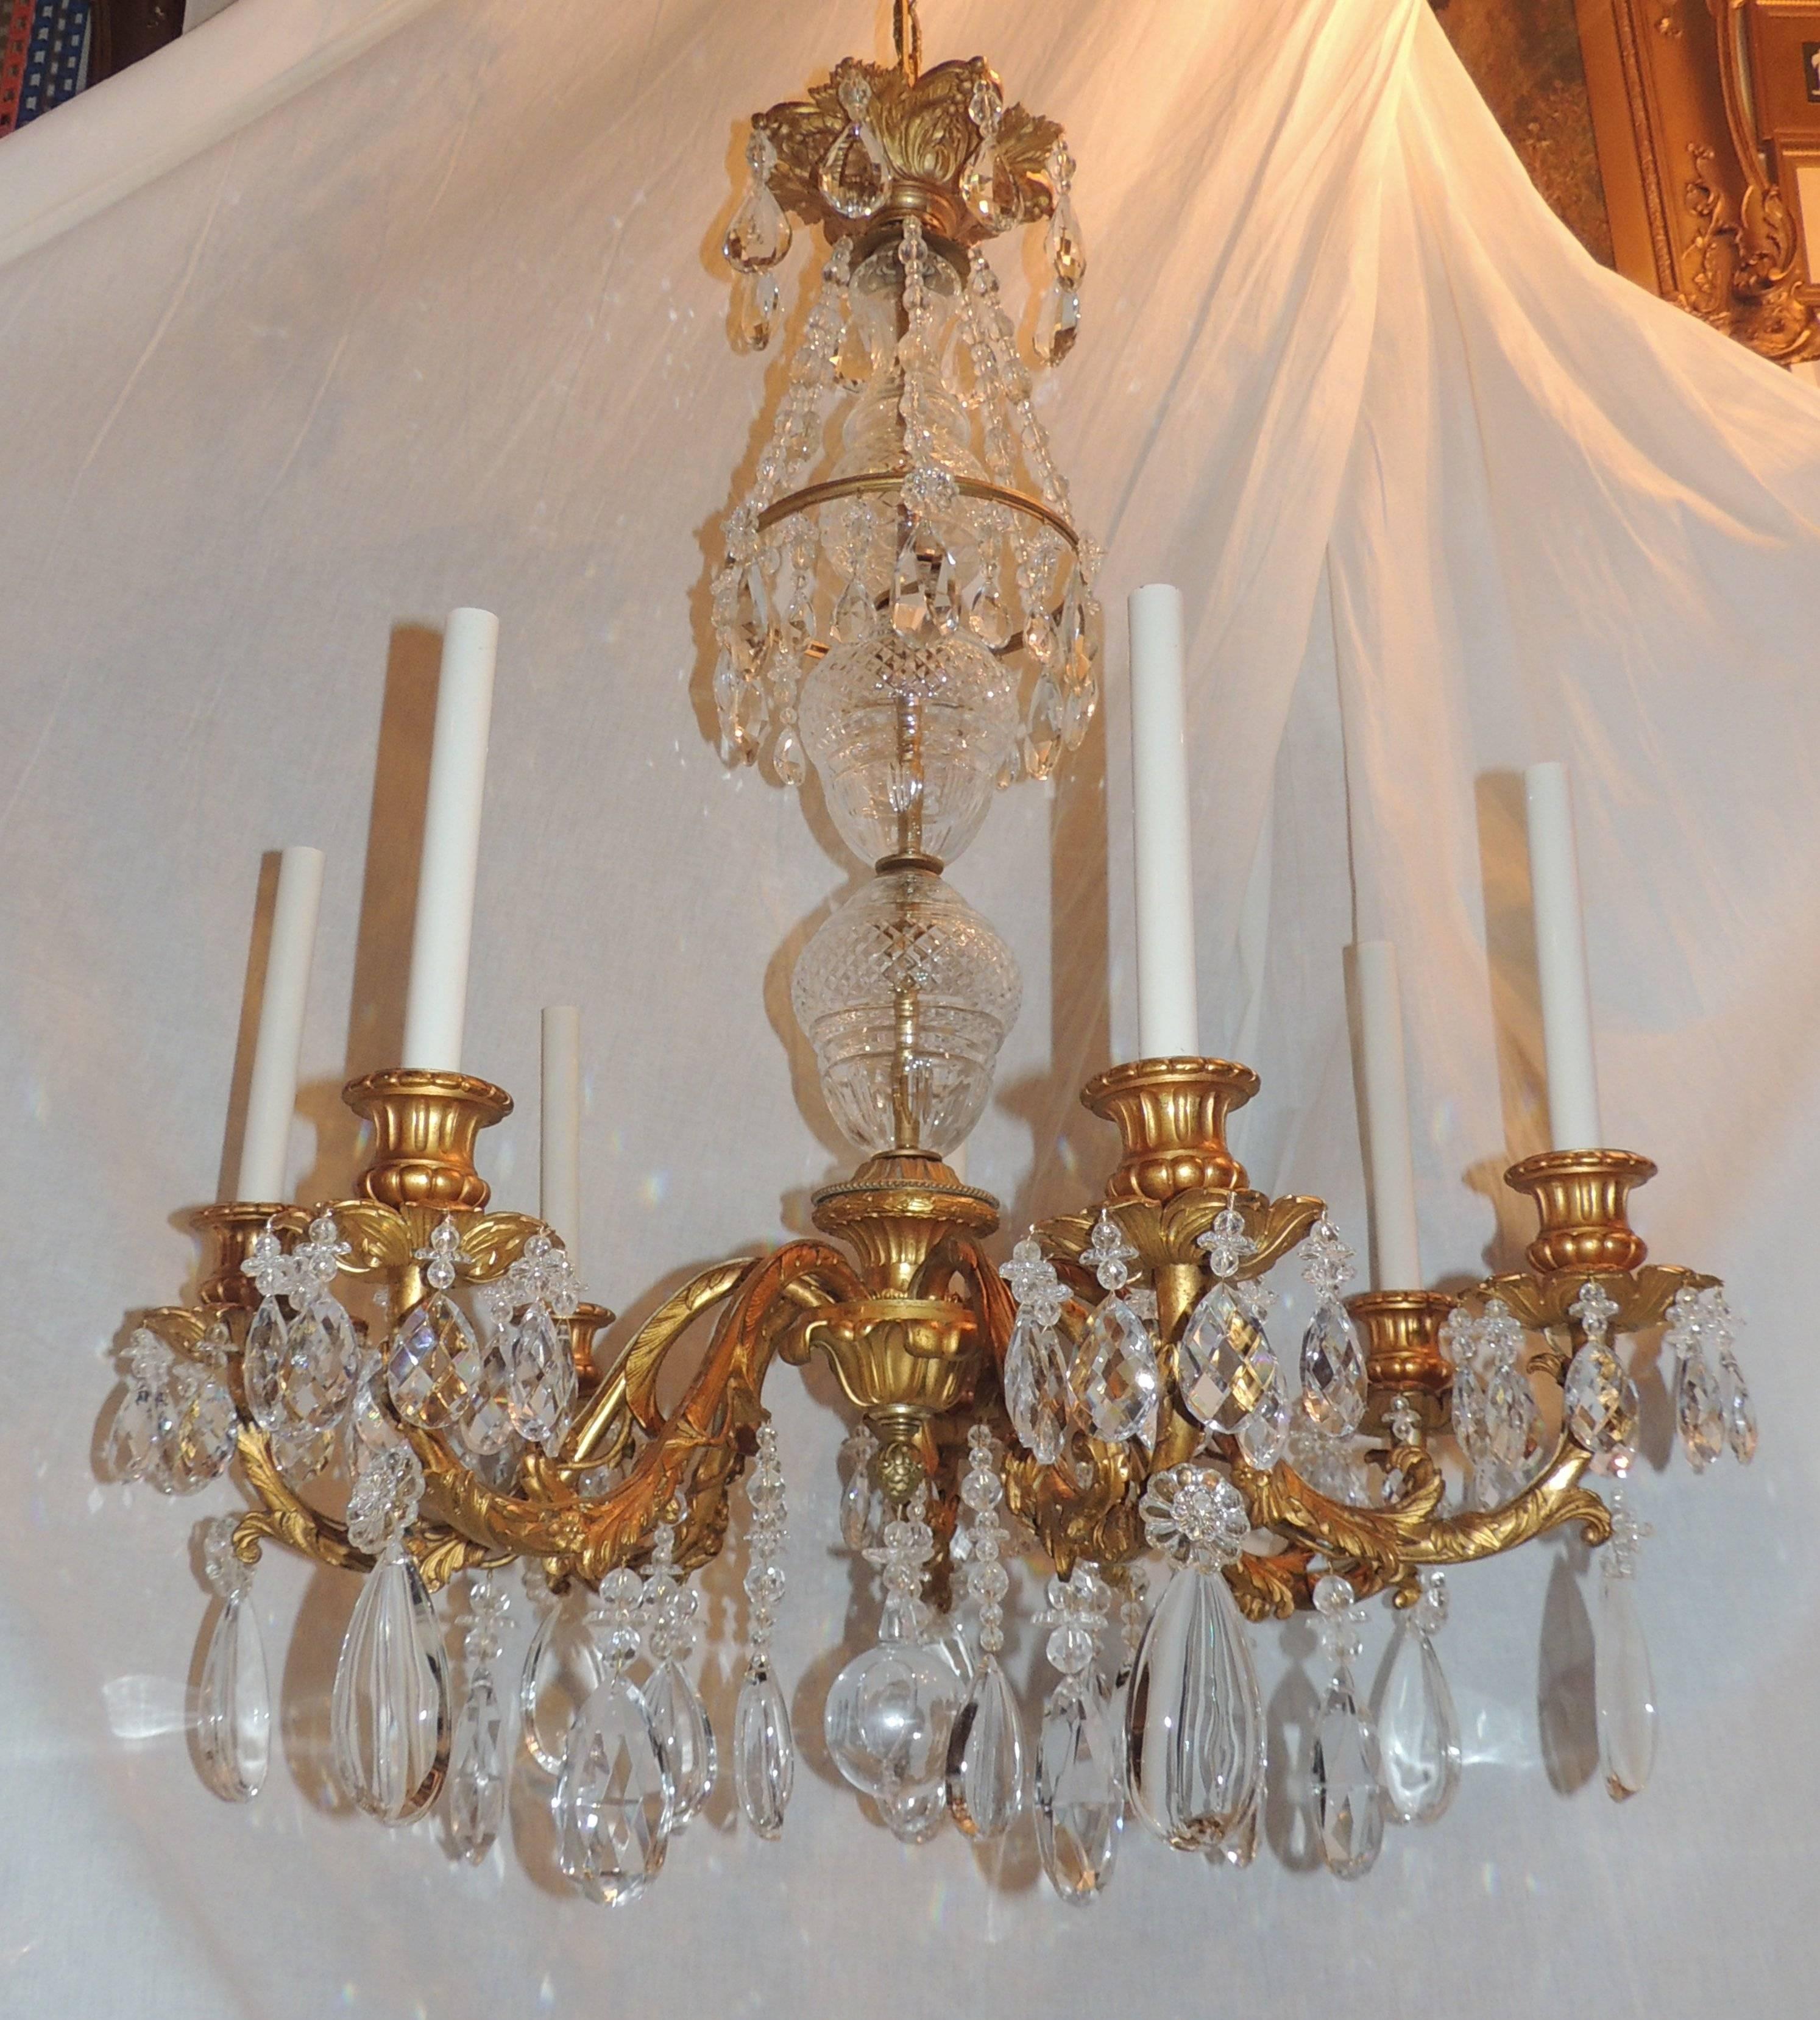 This elegant gilt bronze chandelier has wonderful cut crystal center with seven filigree detailed arms finished with fluted candle cups sitting atop floral bobéches. The crown is draped with crystal drops and flowers and finished with a beautiful